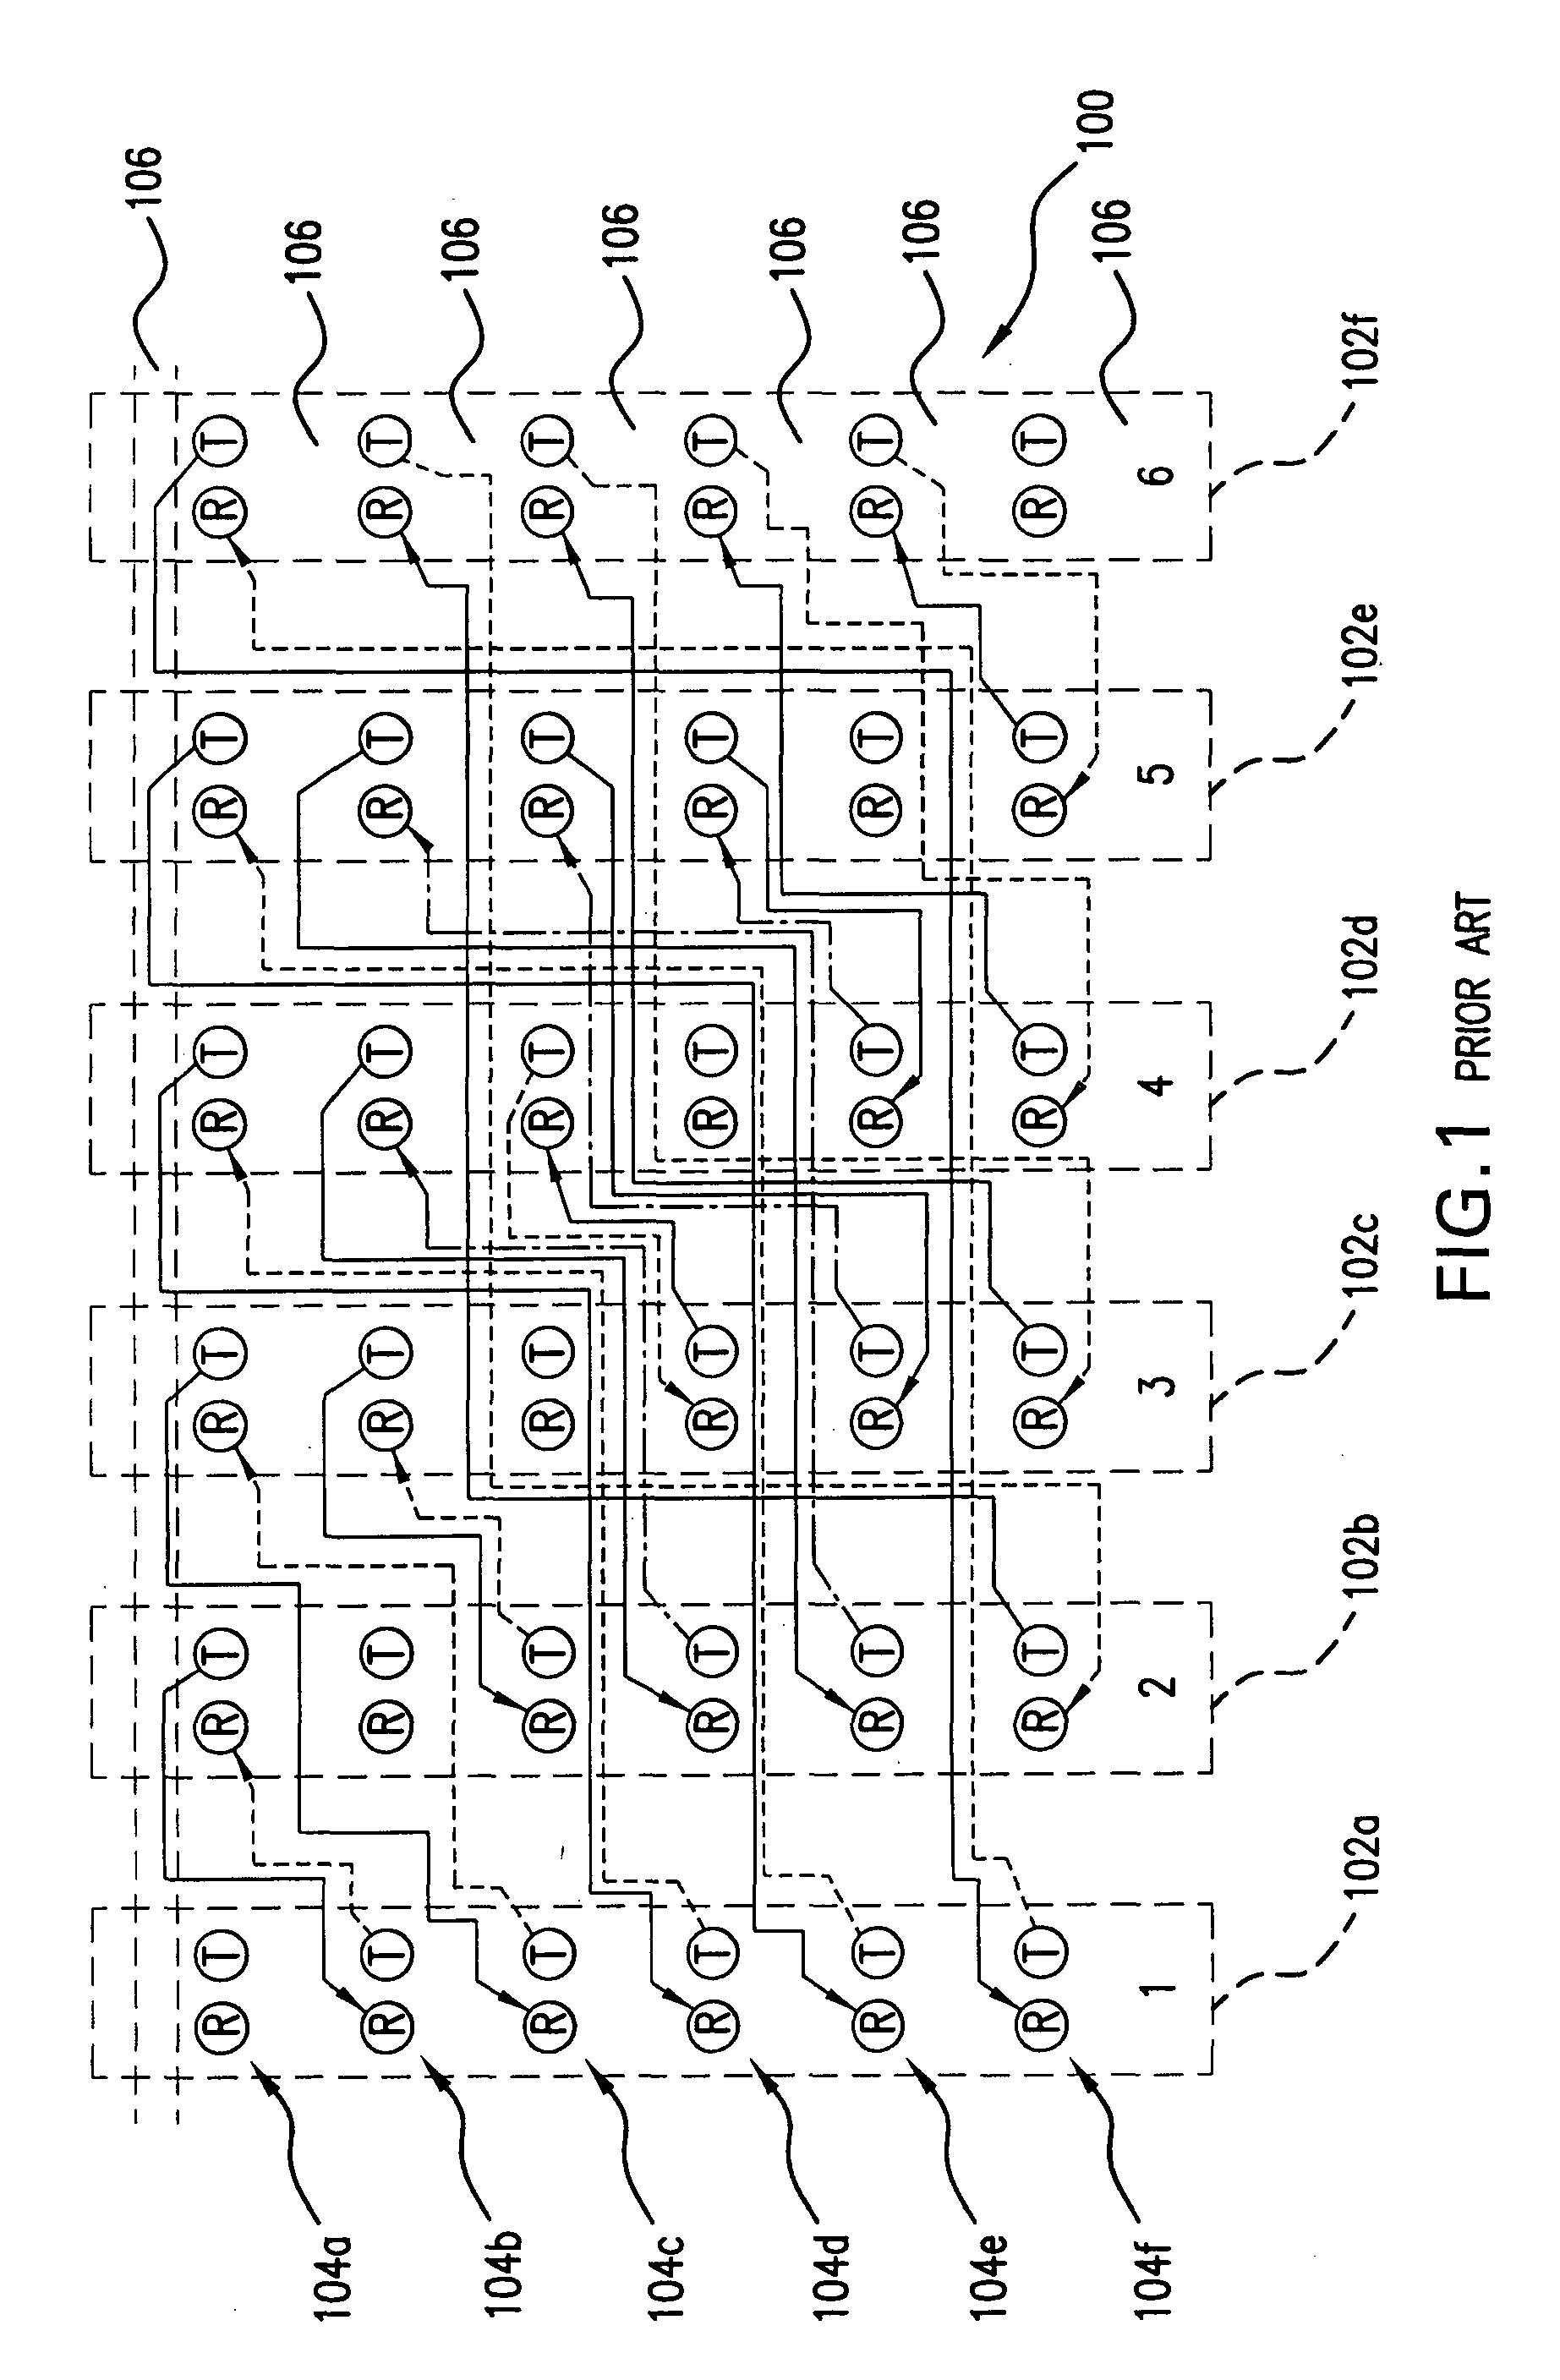 Backplane configuration with shortest-path-relative-shift routing